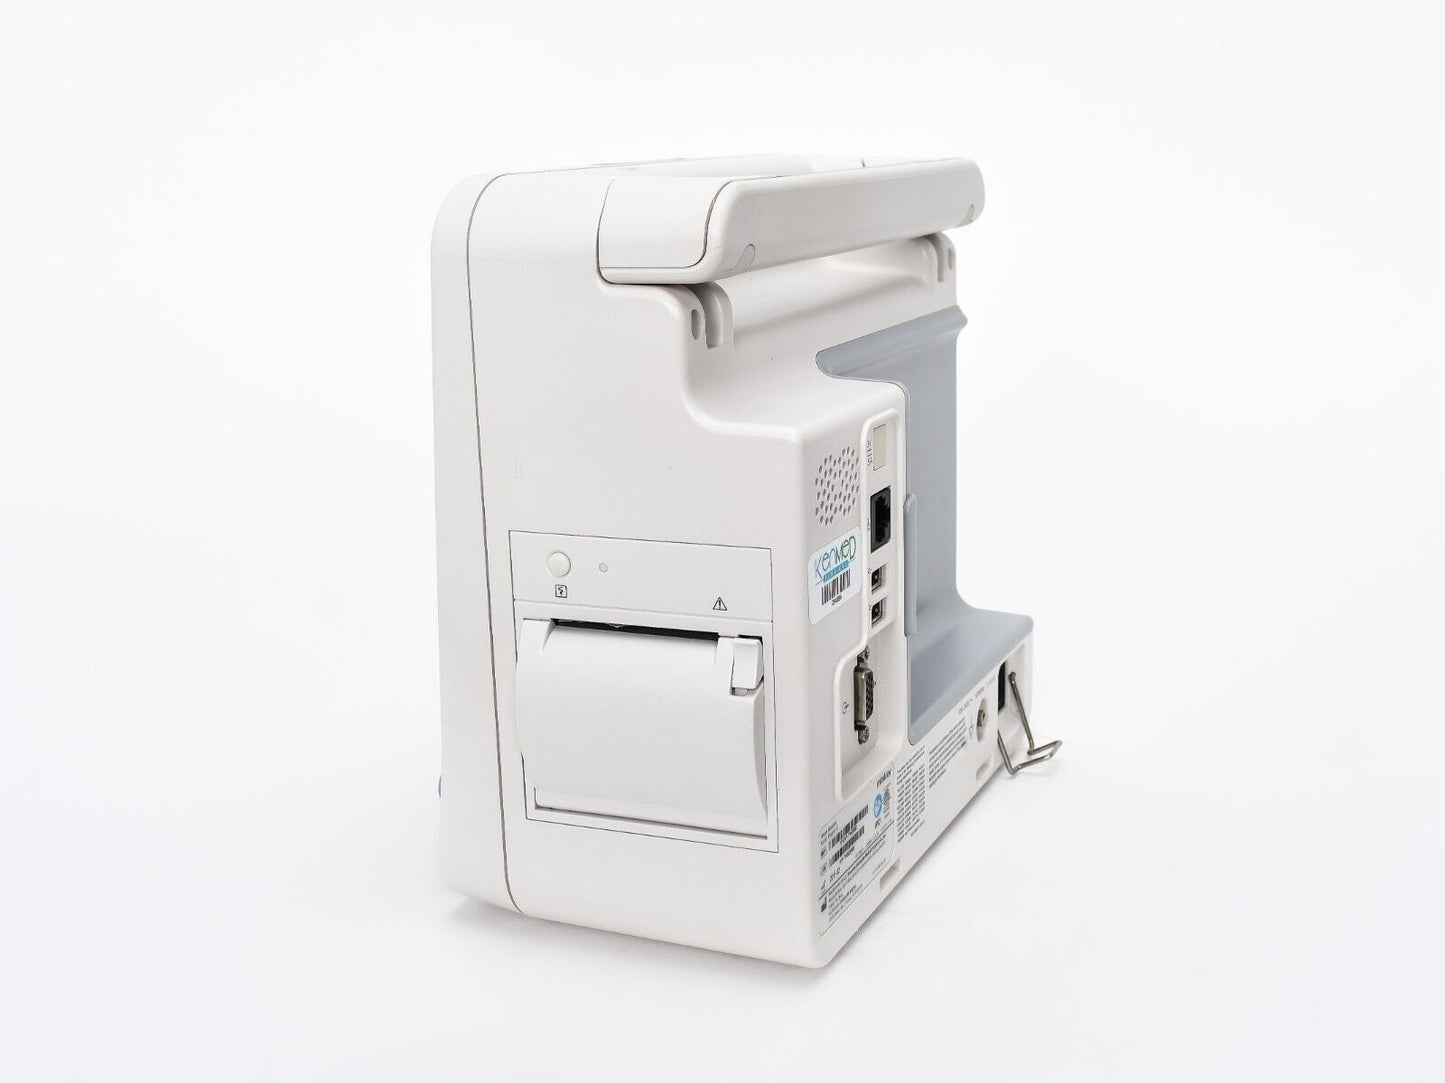 Mindray Passport 8 Patient Monitor Accessories 6104F-PA00003